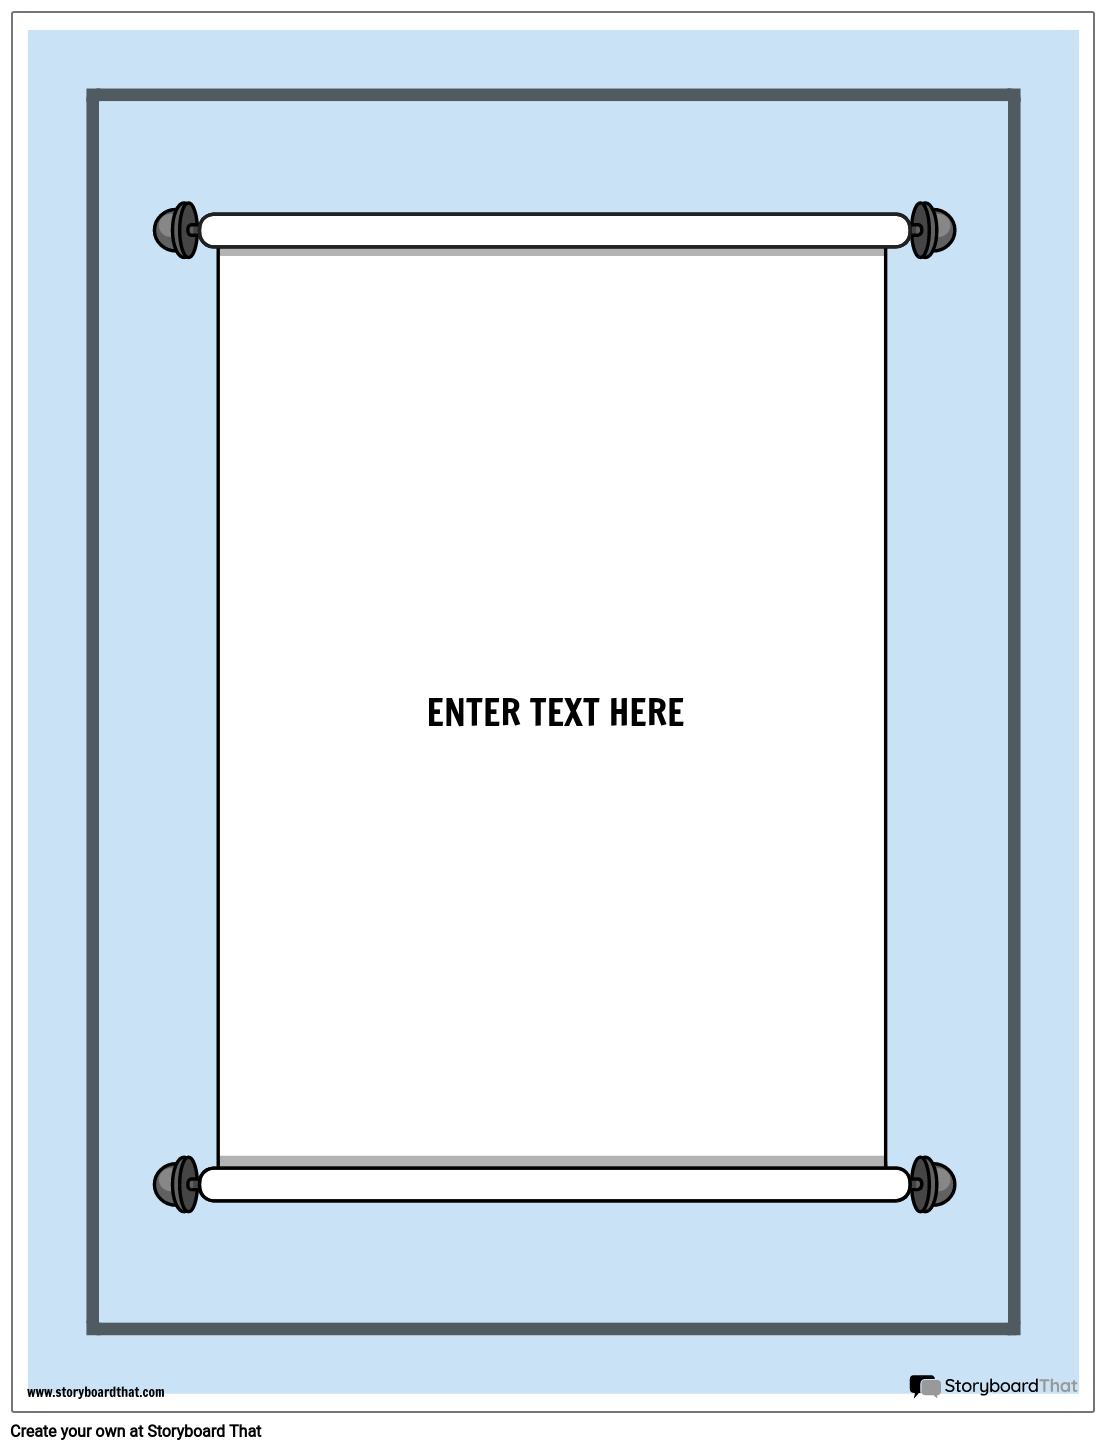 Journal Cover Template — DIY Journal Cover | StoryboardThat